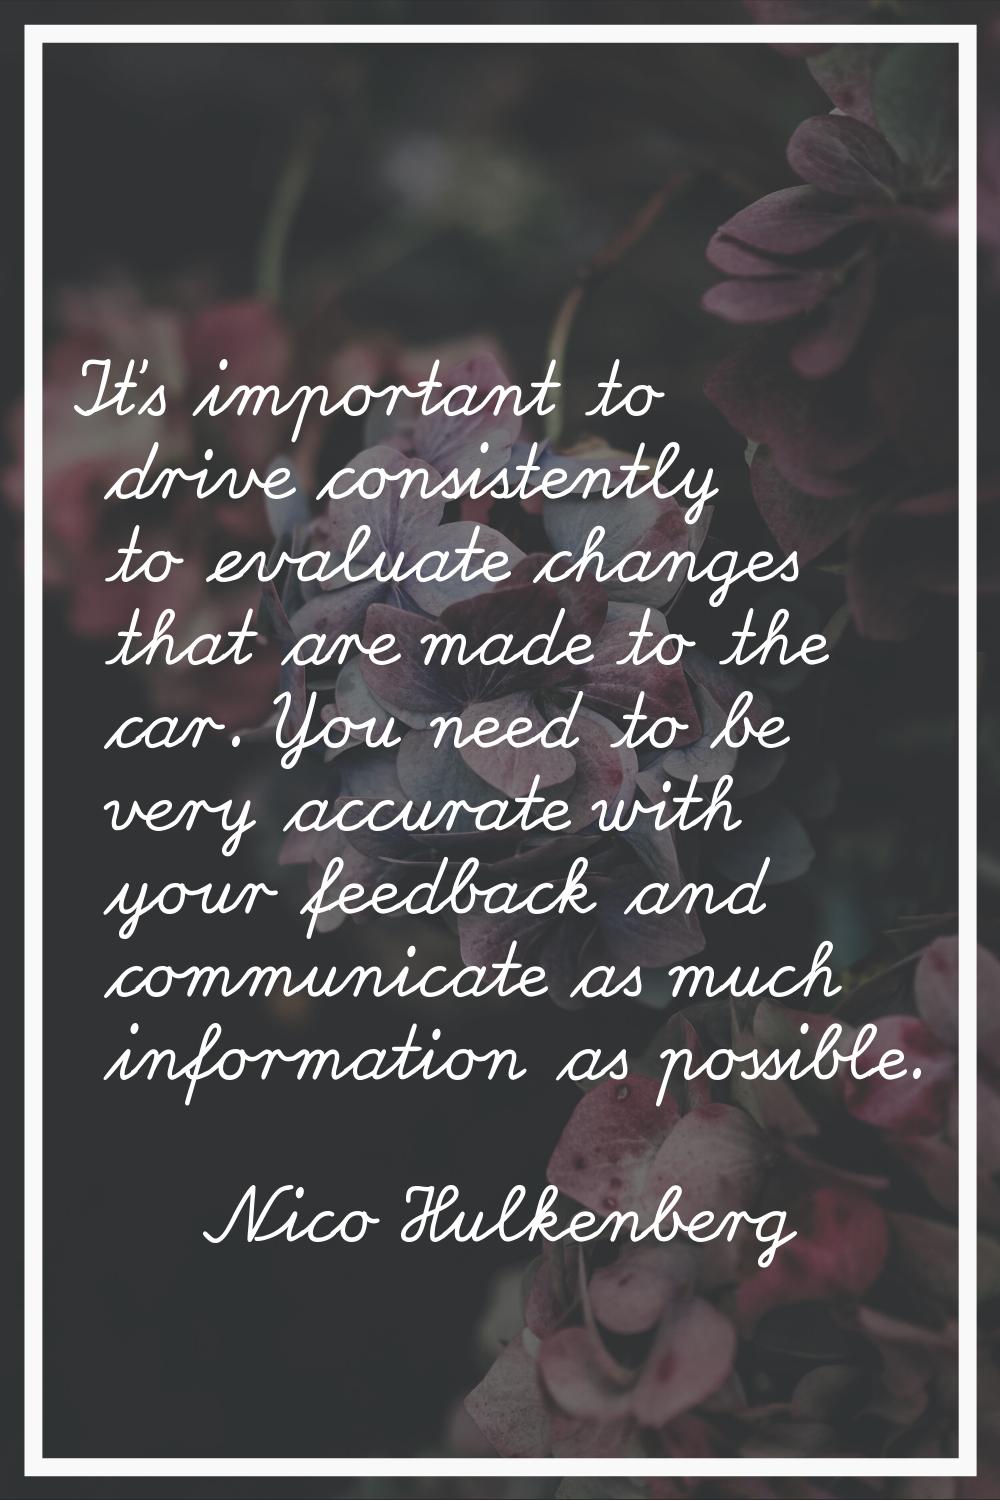 It's important to drive consistently to evaluate changes that are made to the car. You need to be v